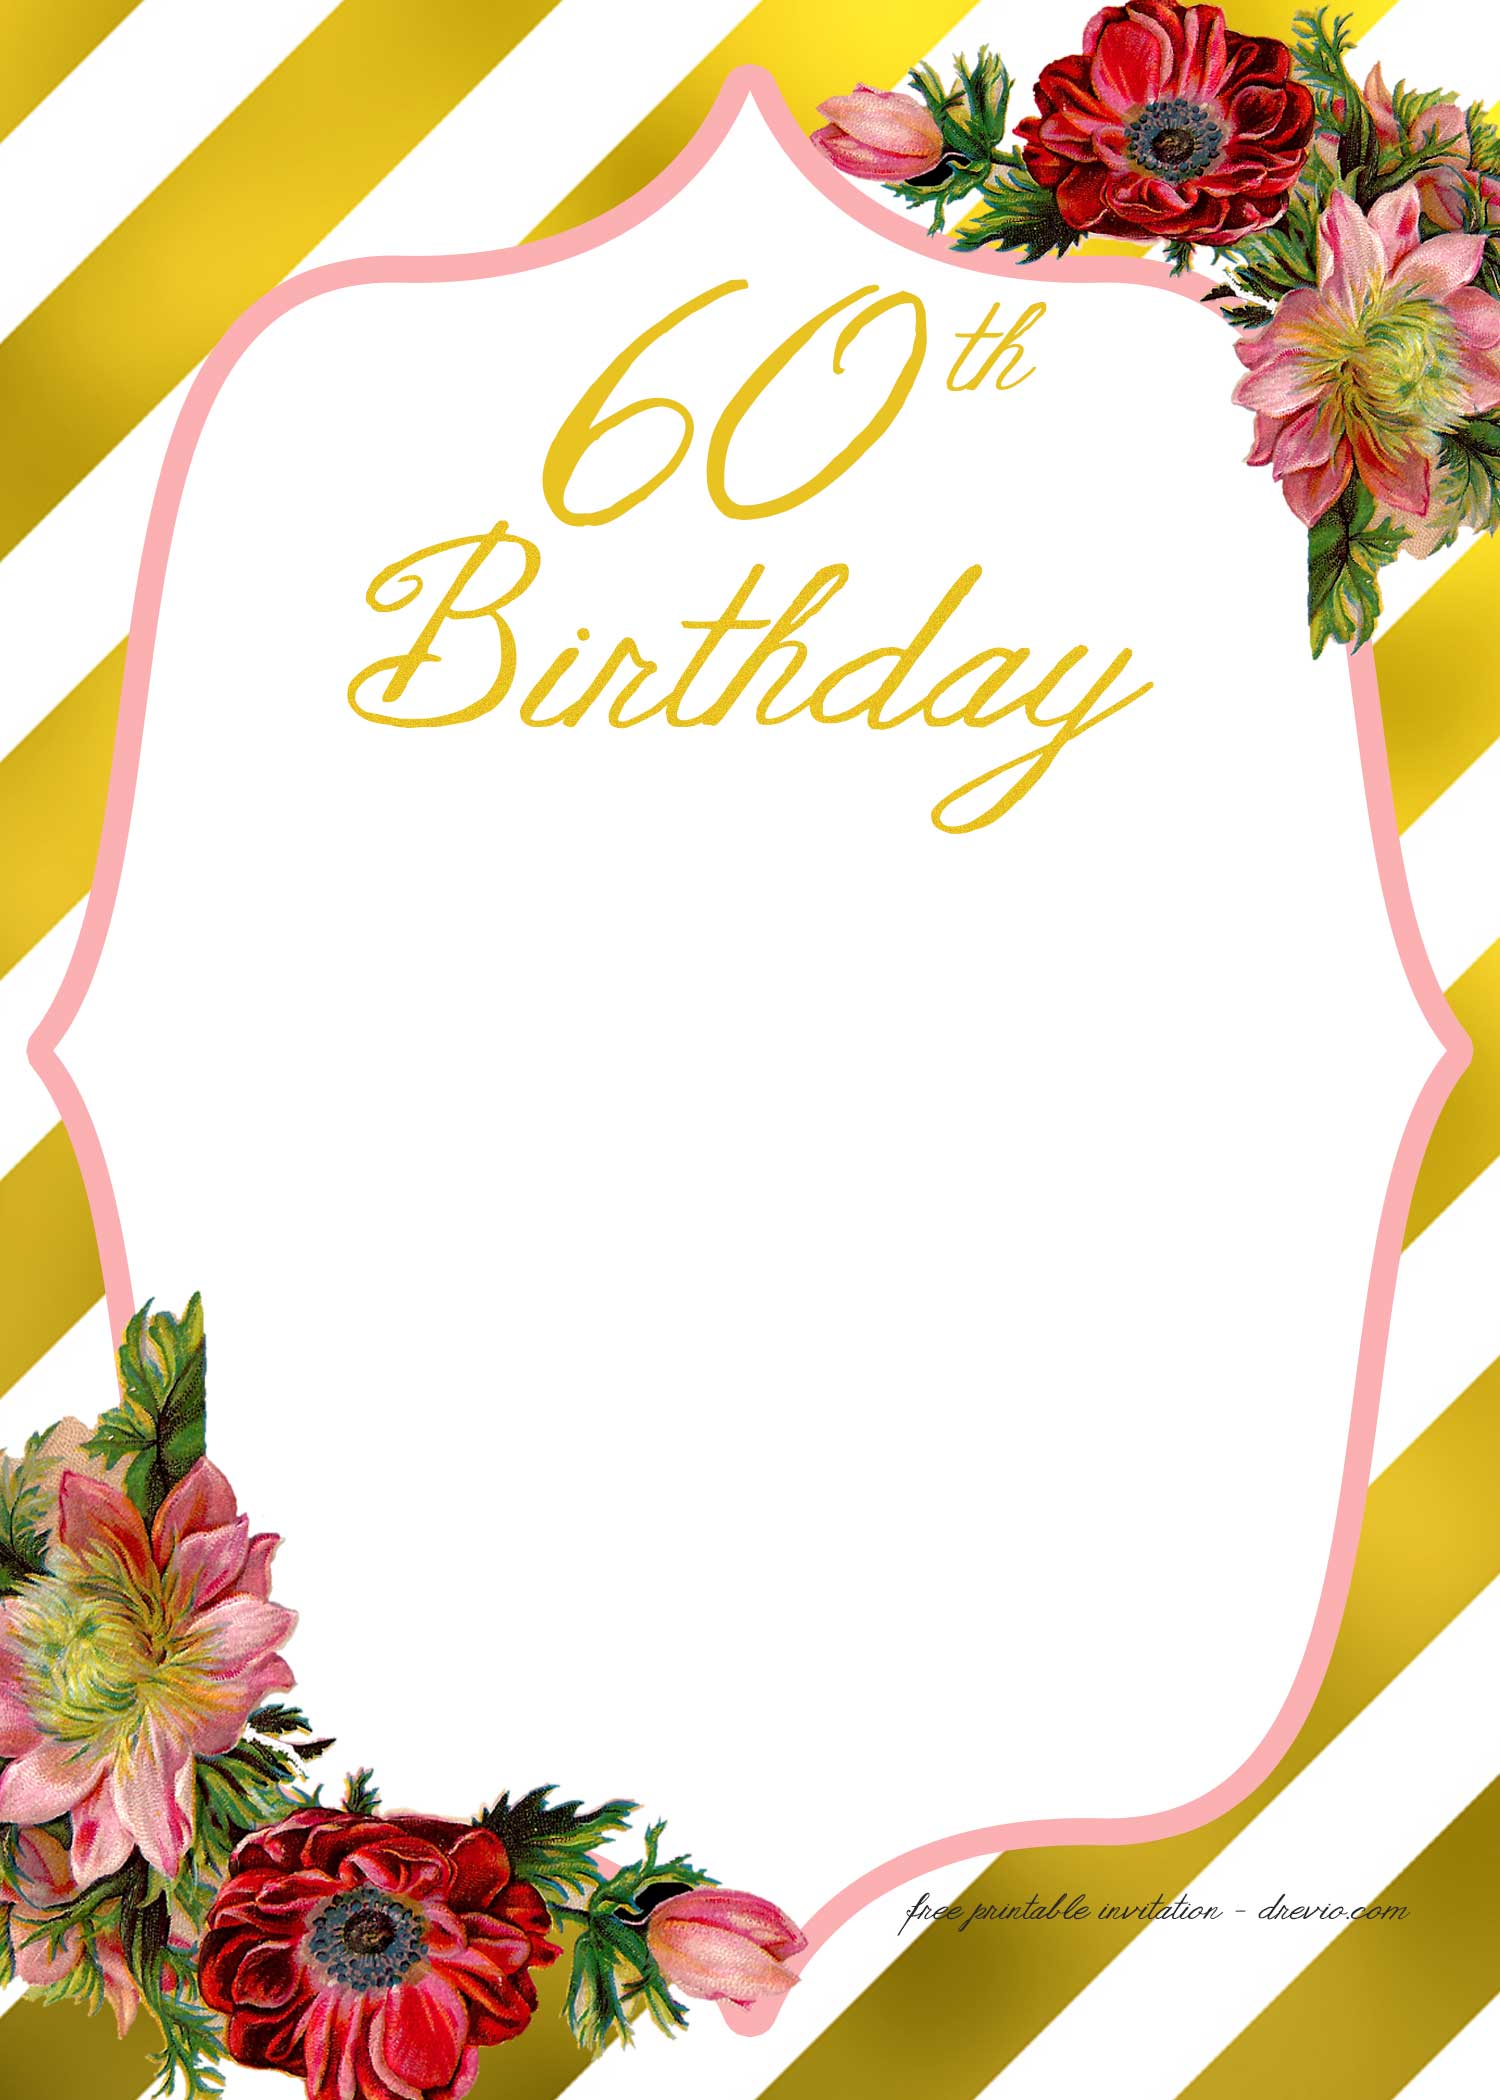 Adult Birthday Invitations Template For 50th Years Old And Up Download Hundreds FREE